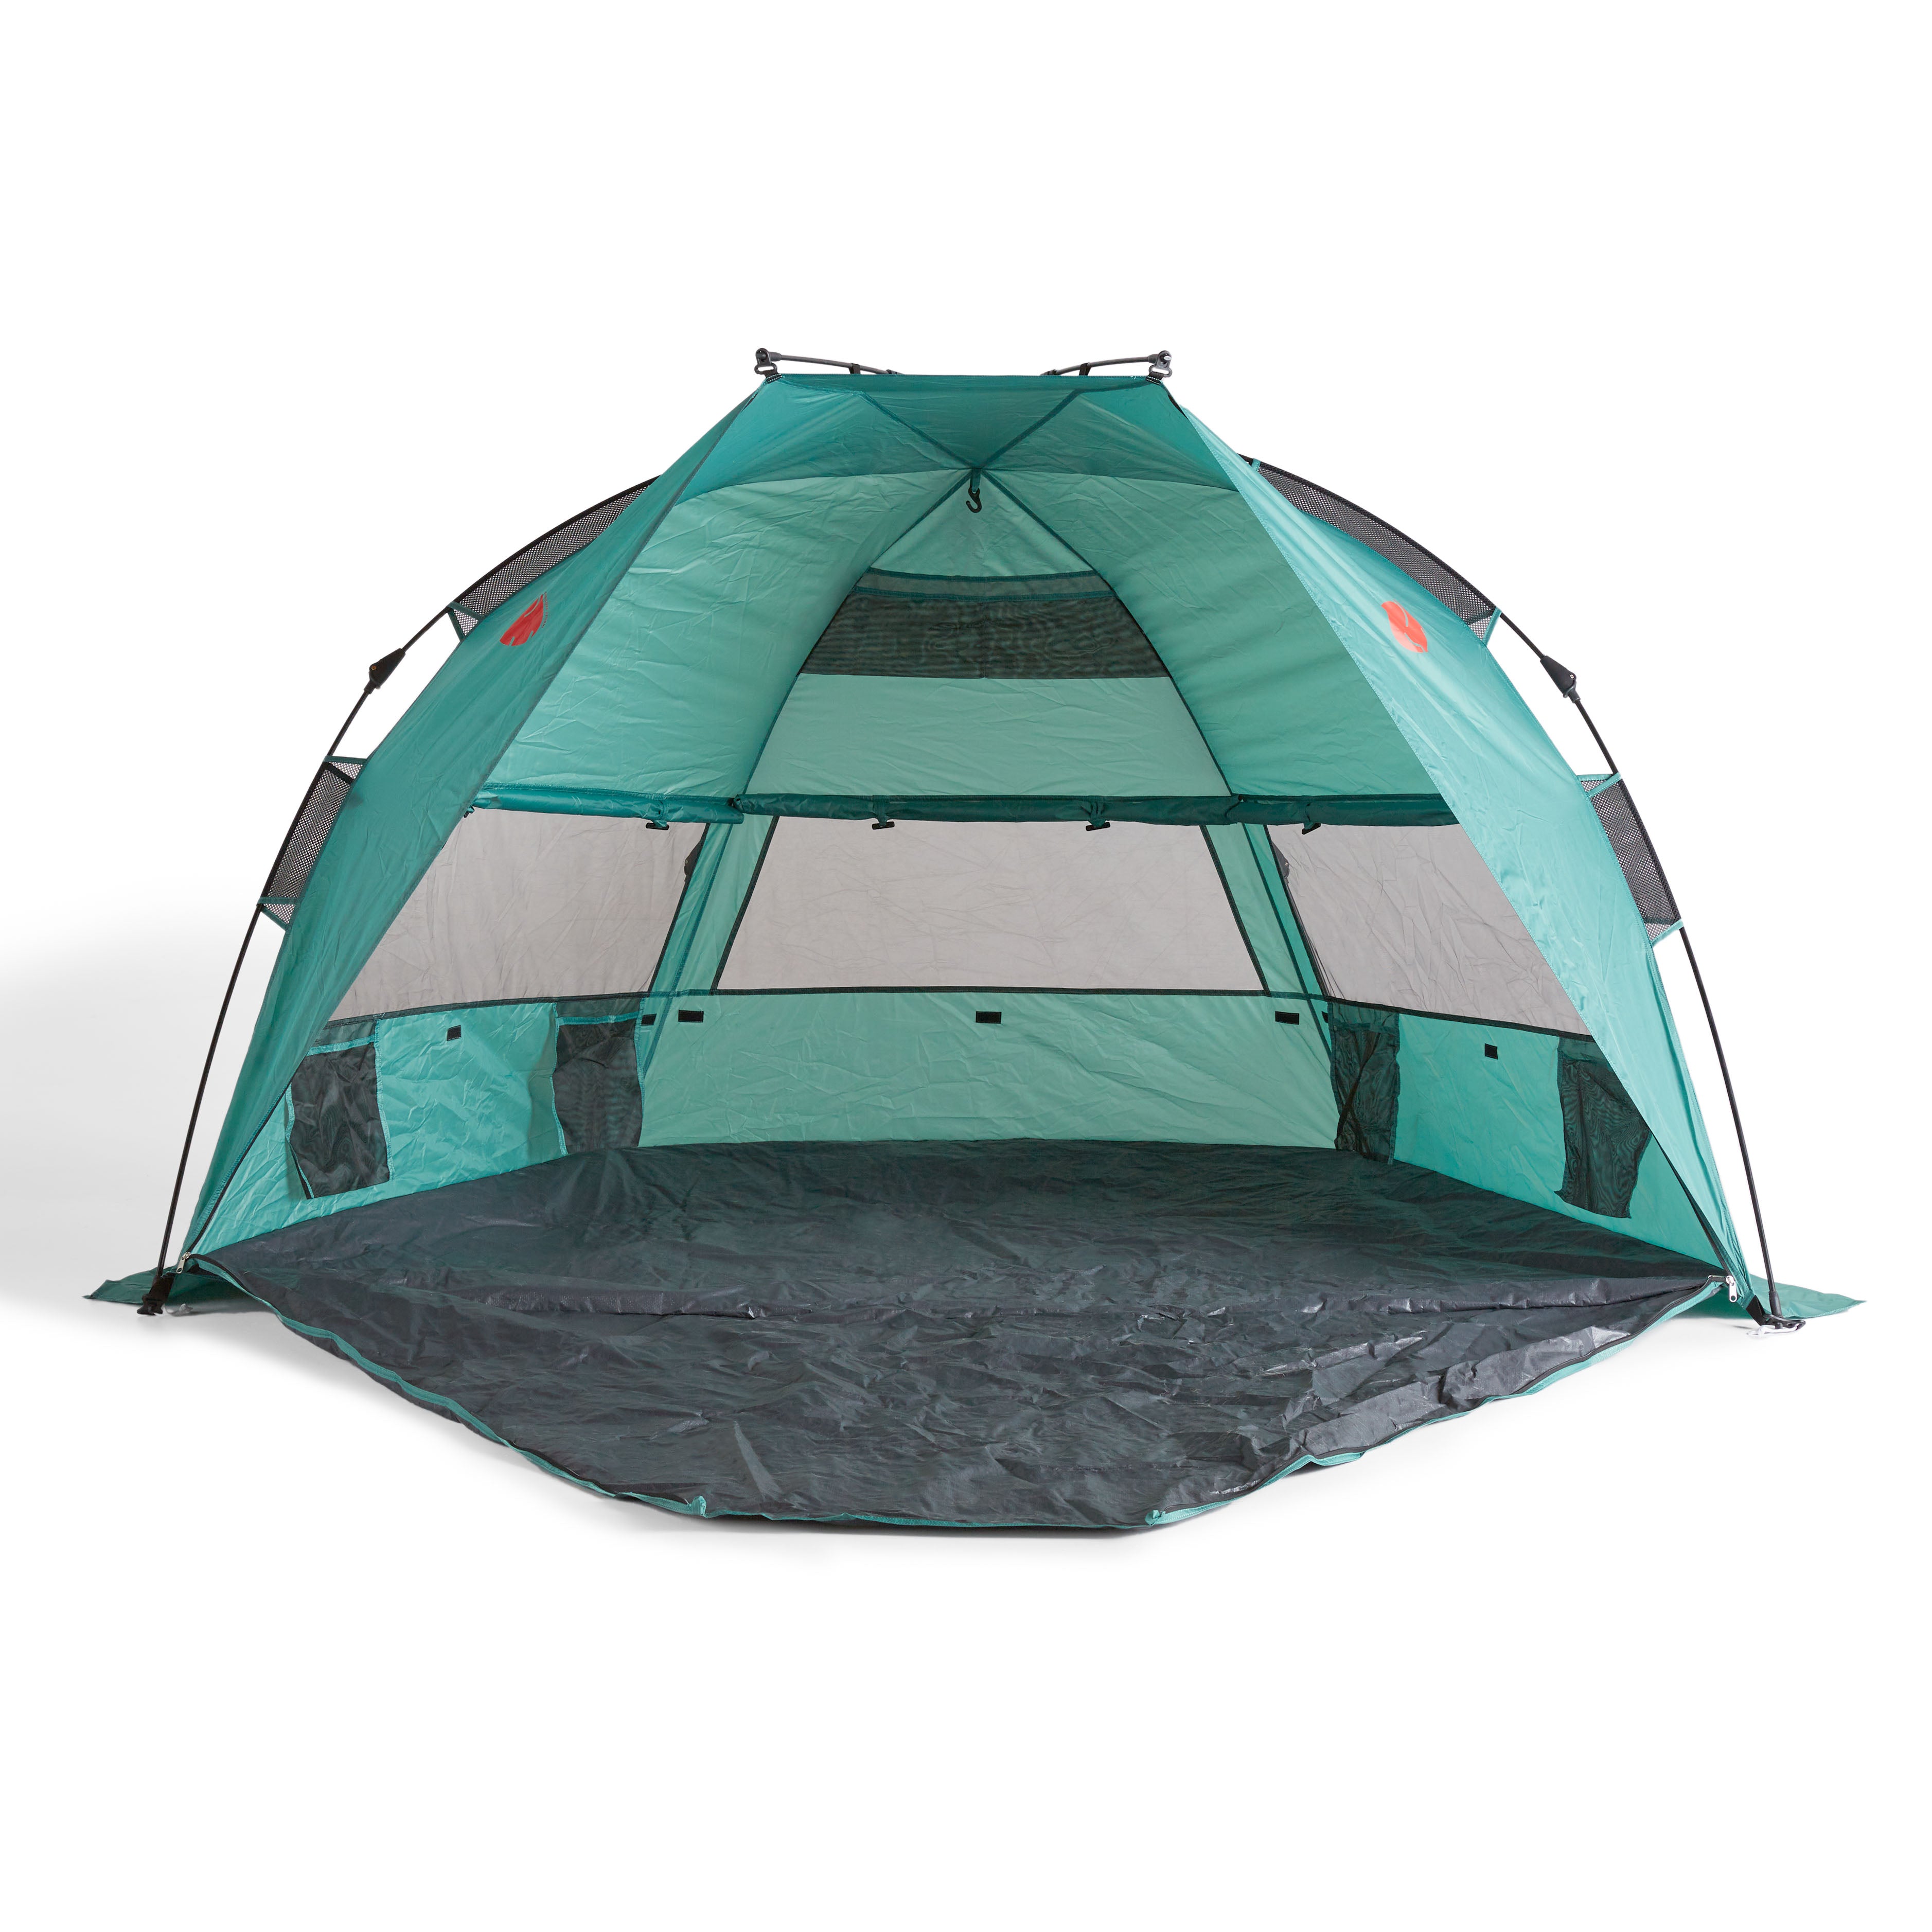 DESIGNS XL 4 Person Pop Up EASY SET UP BEACH TENT - Green – OmniCoreDesigns